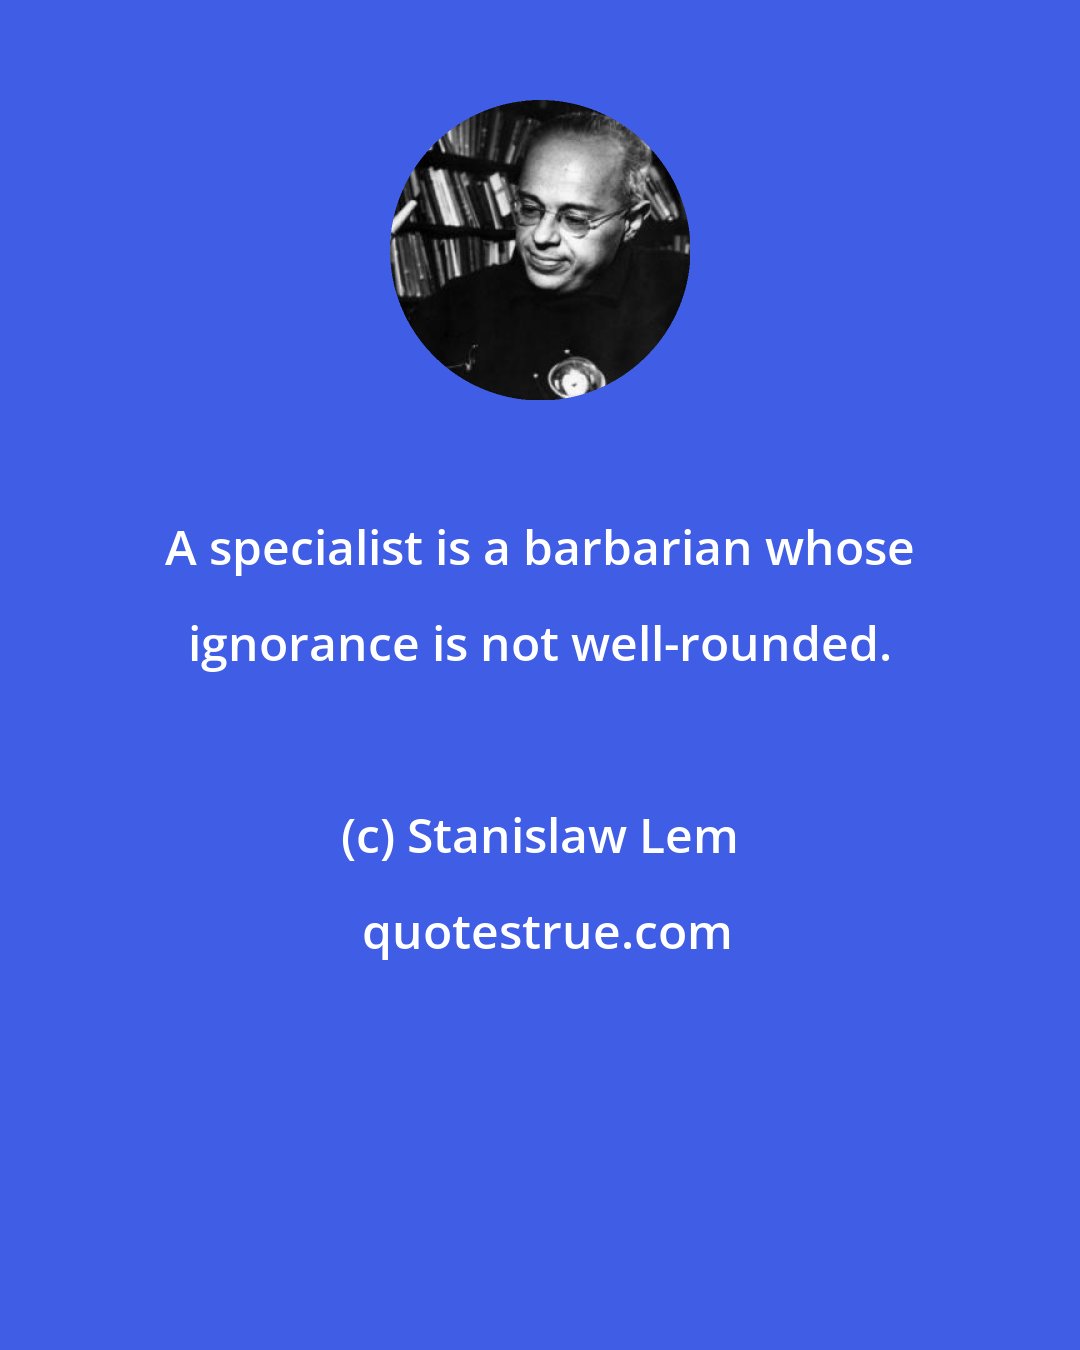 Stanislaw Lem: A specialist is a barbarian whose ignorance is not well-rounded.